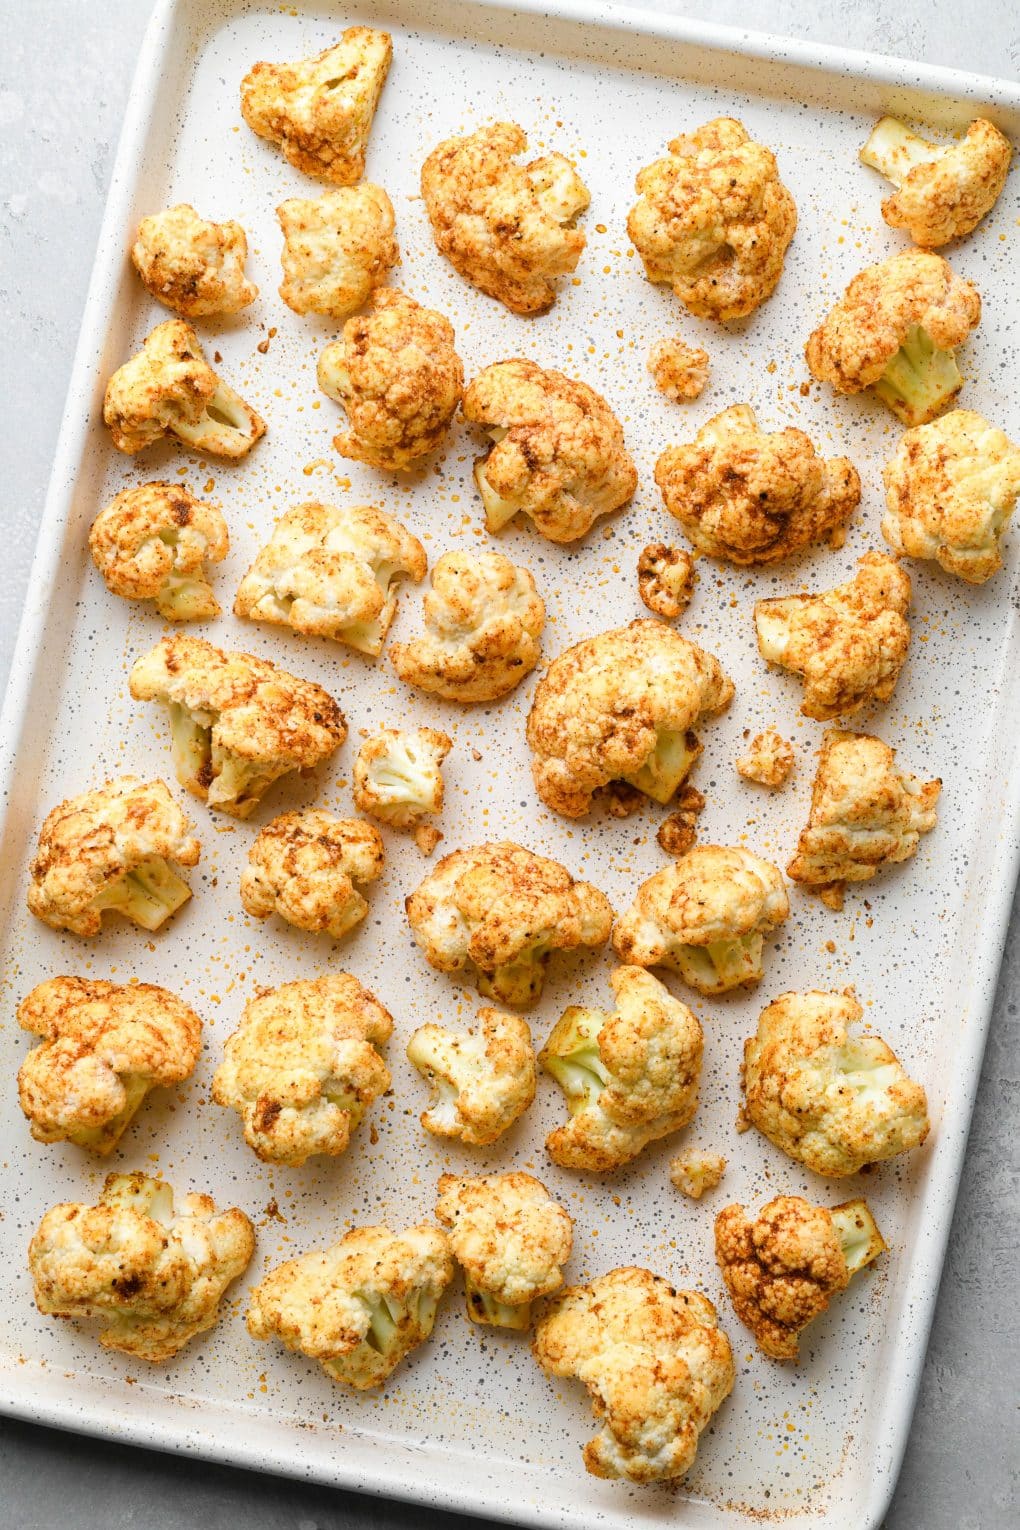 How to make Mexican Roasted Cauliflower: Raw cauliflower florets tossed with oil and spices on a white speckled baking sheet.